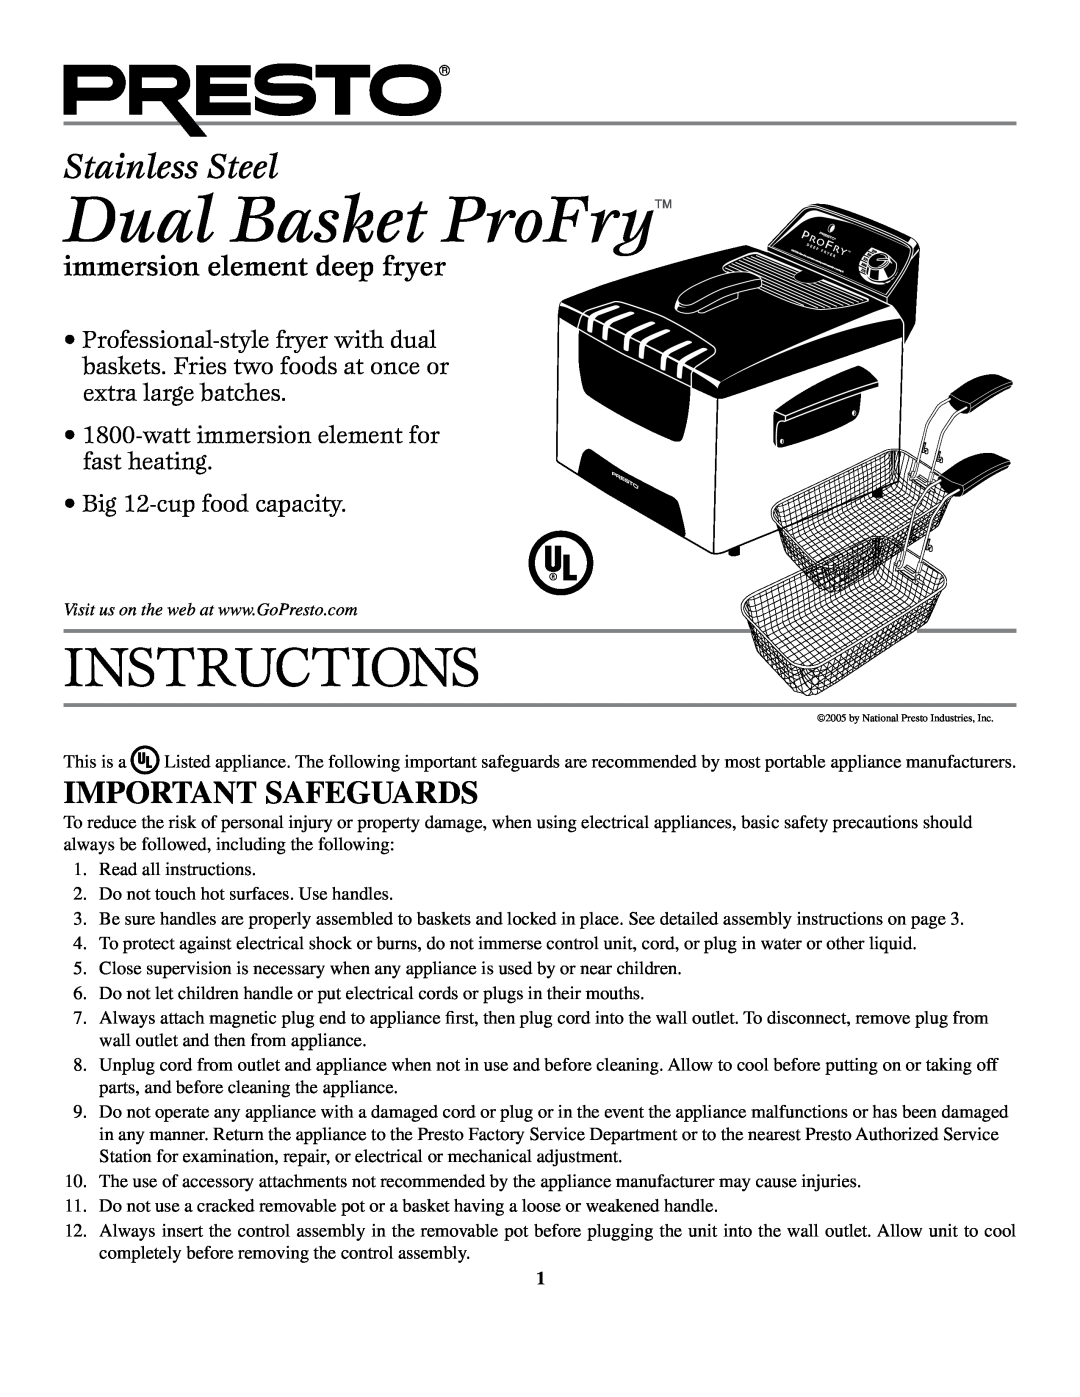 Presto manual Important Safeguards, Dual Basket ProFry, Instructions, Stainless Steel, immersion element deep fryer 